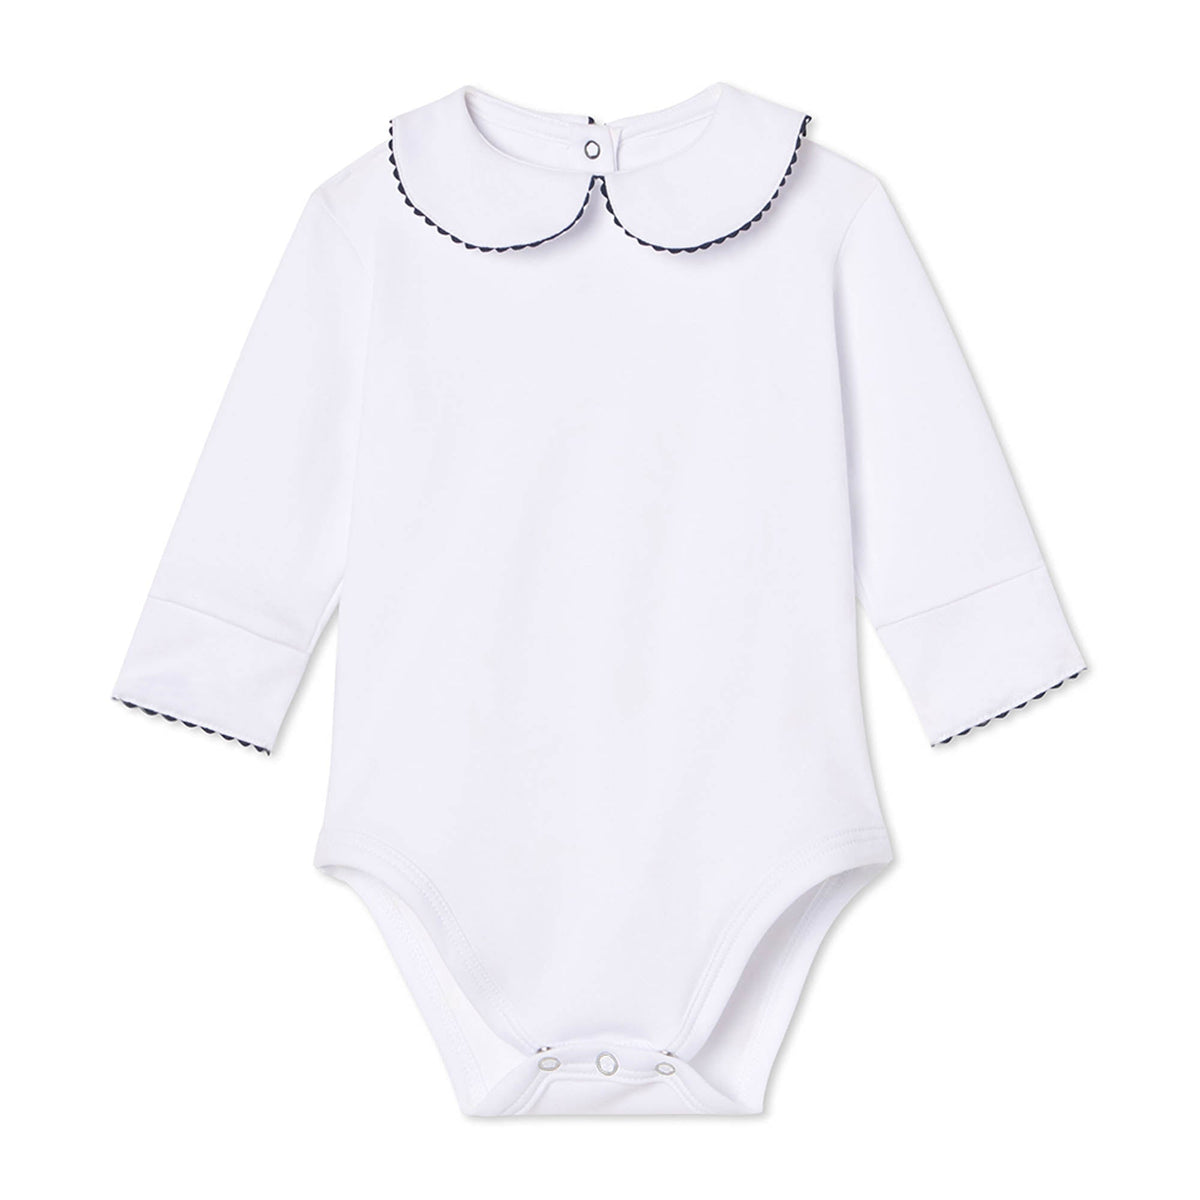 Classic and Preppy Izzy Long Sleeve Onesie, White with Blue Ribbon Ric Rac-Baby Rompers-Bright White with Blue Ribbon Ric Rac-0-3M-CPC - Classic Prep Childrenswear